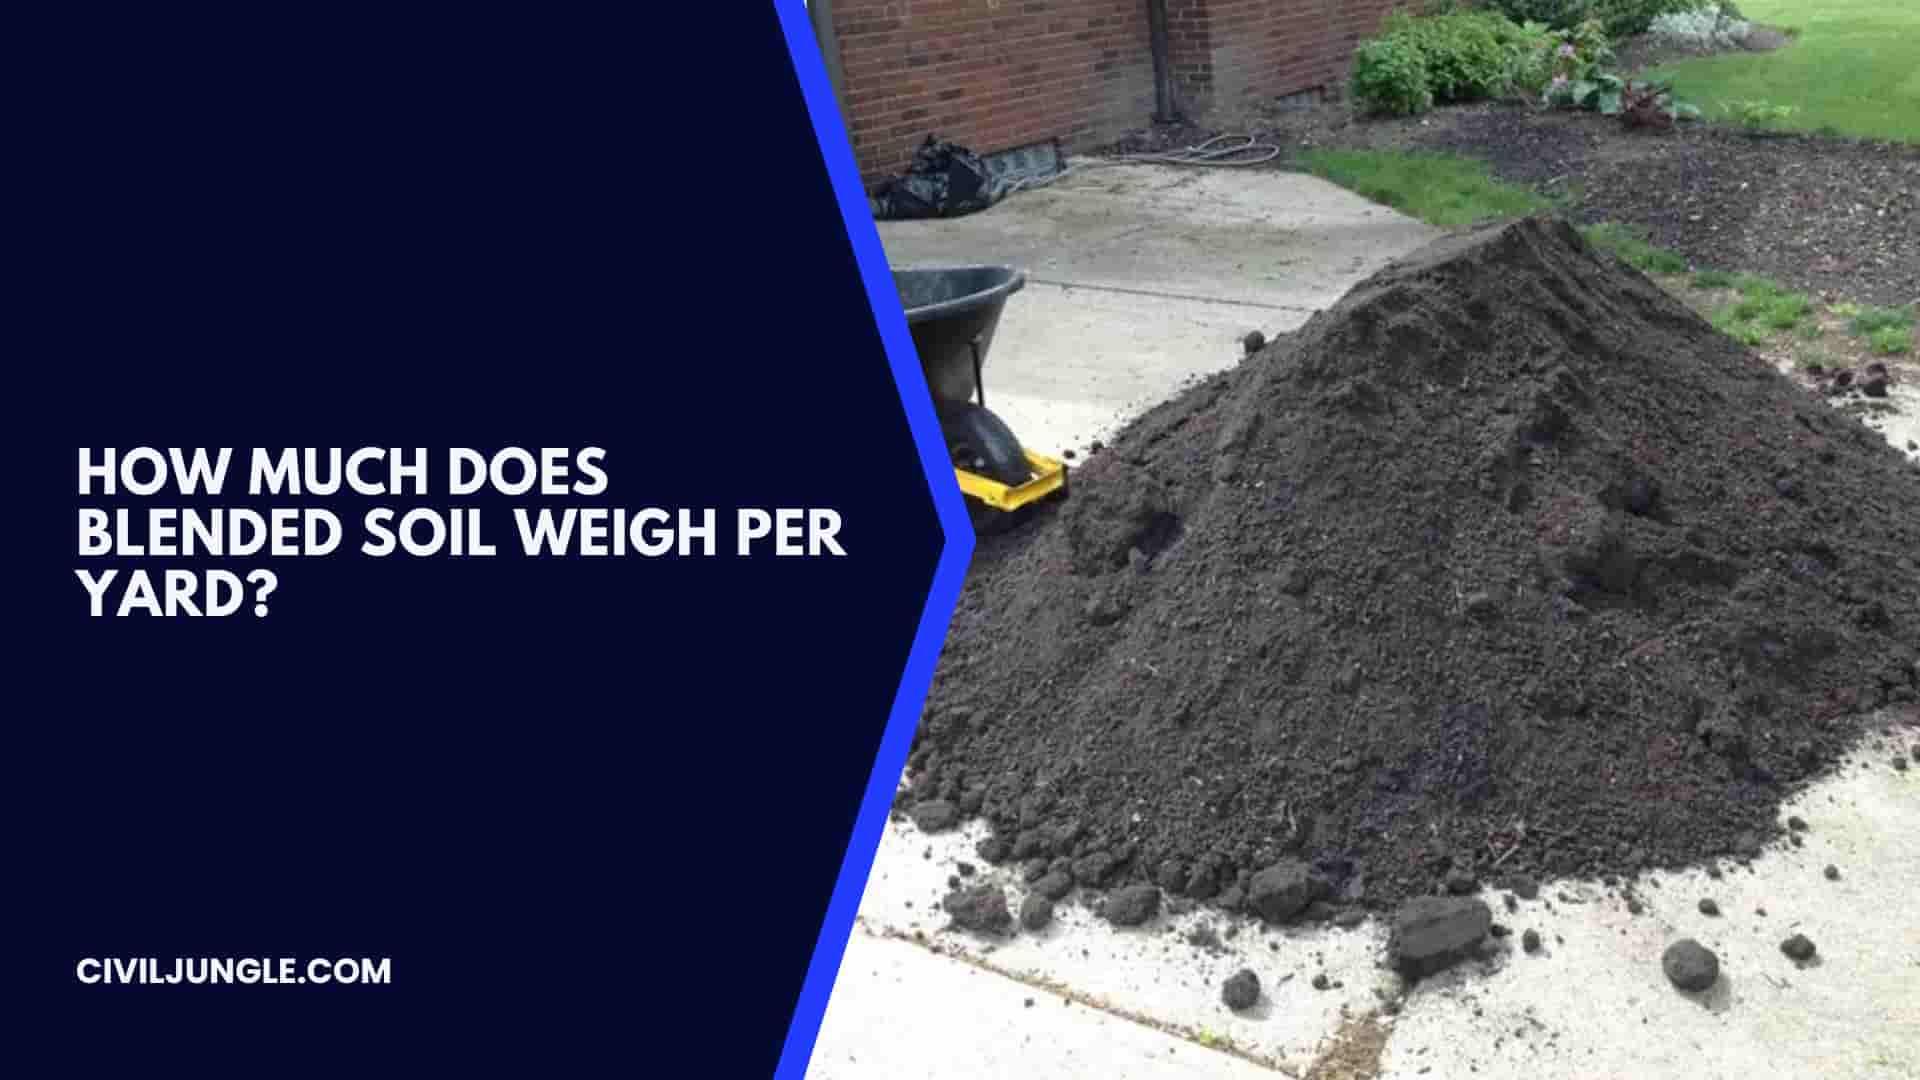 How Much Does Blended Soil Weigh Per Yard?